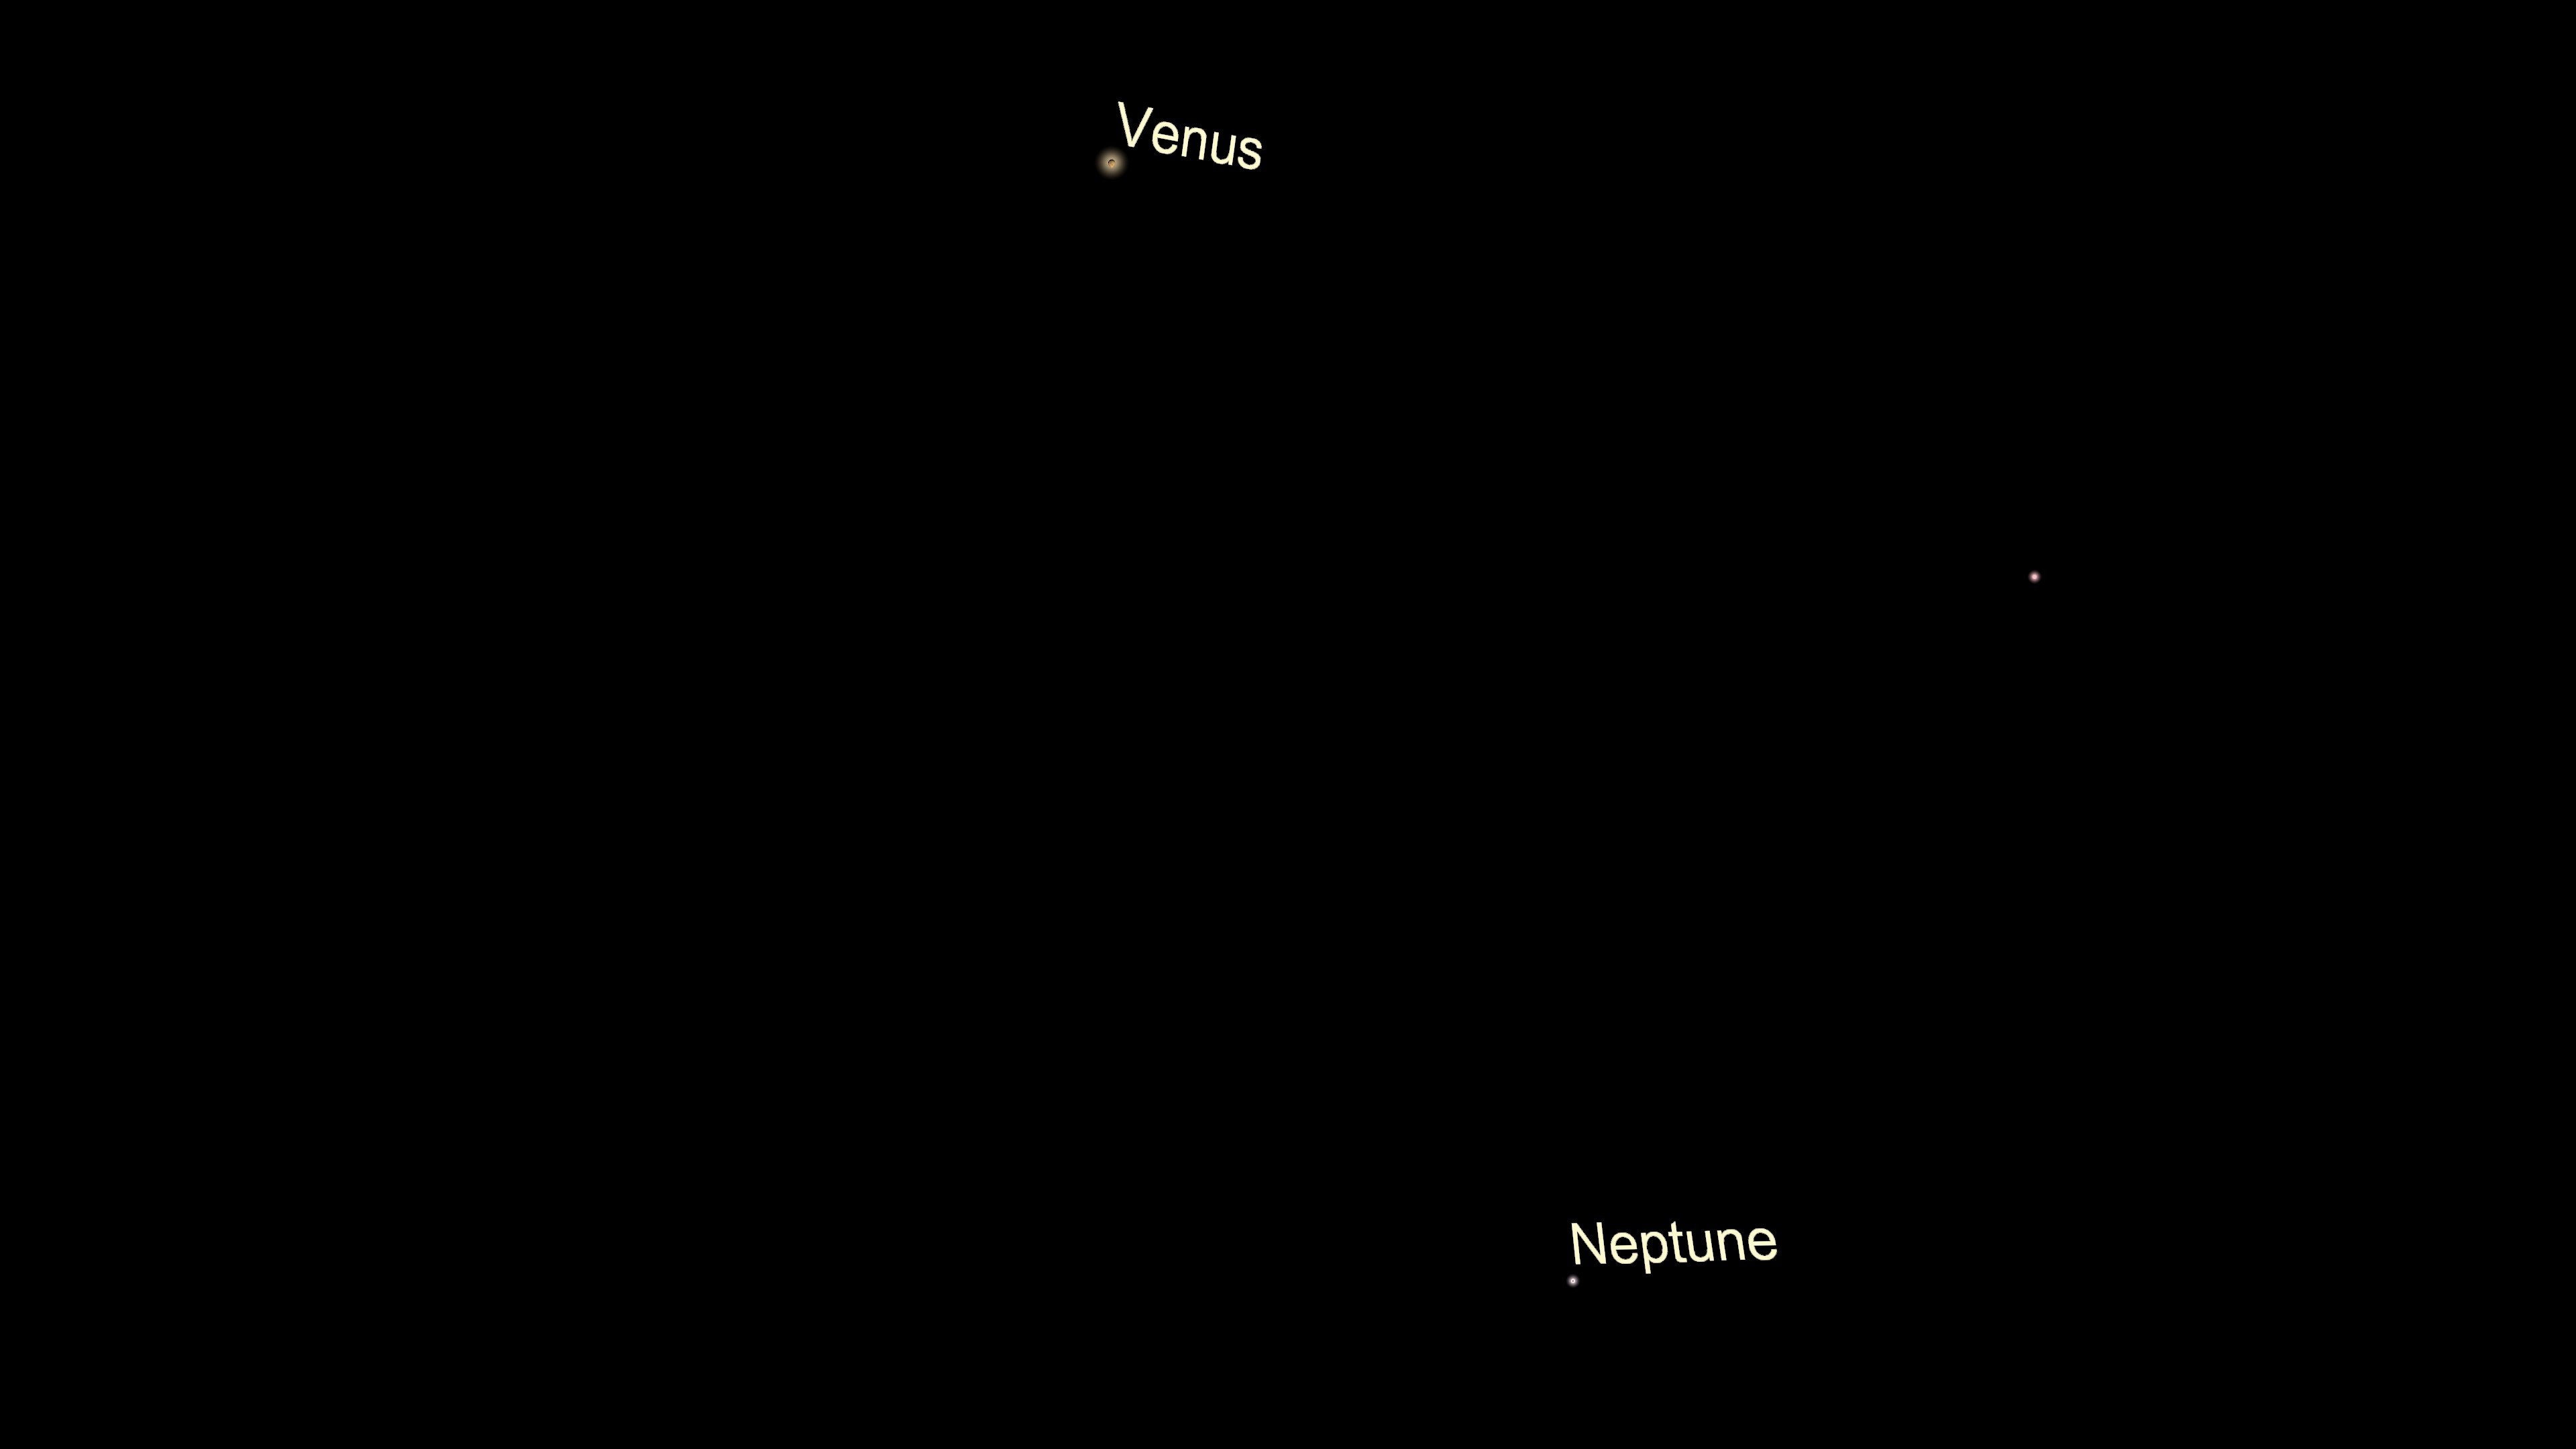 Venus and Neptune are magnified to 200x to simulate the view through a telescope.